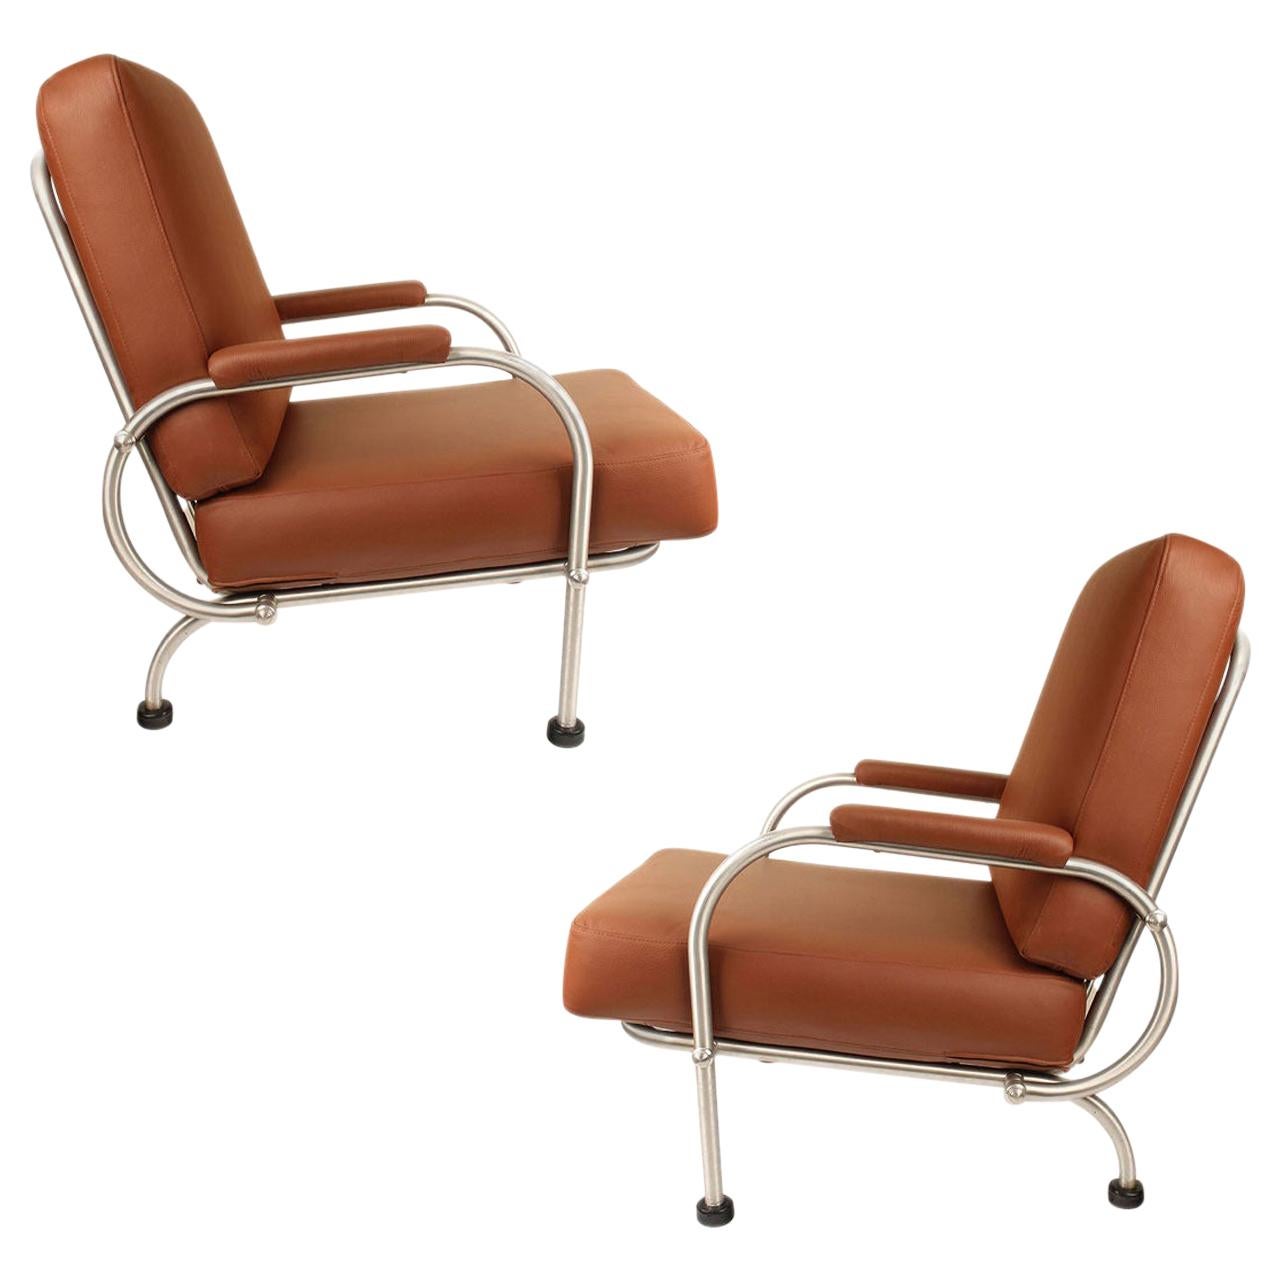  Pair of 1930s Art Deco Warren McArthur Lounge Chairs For Sale